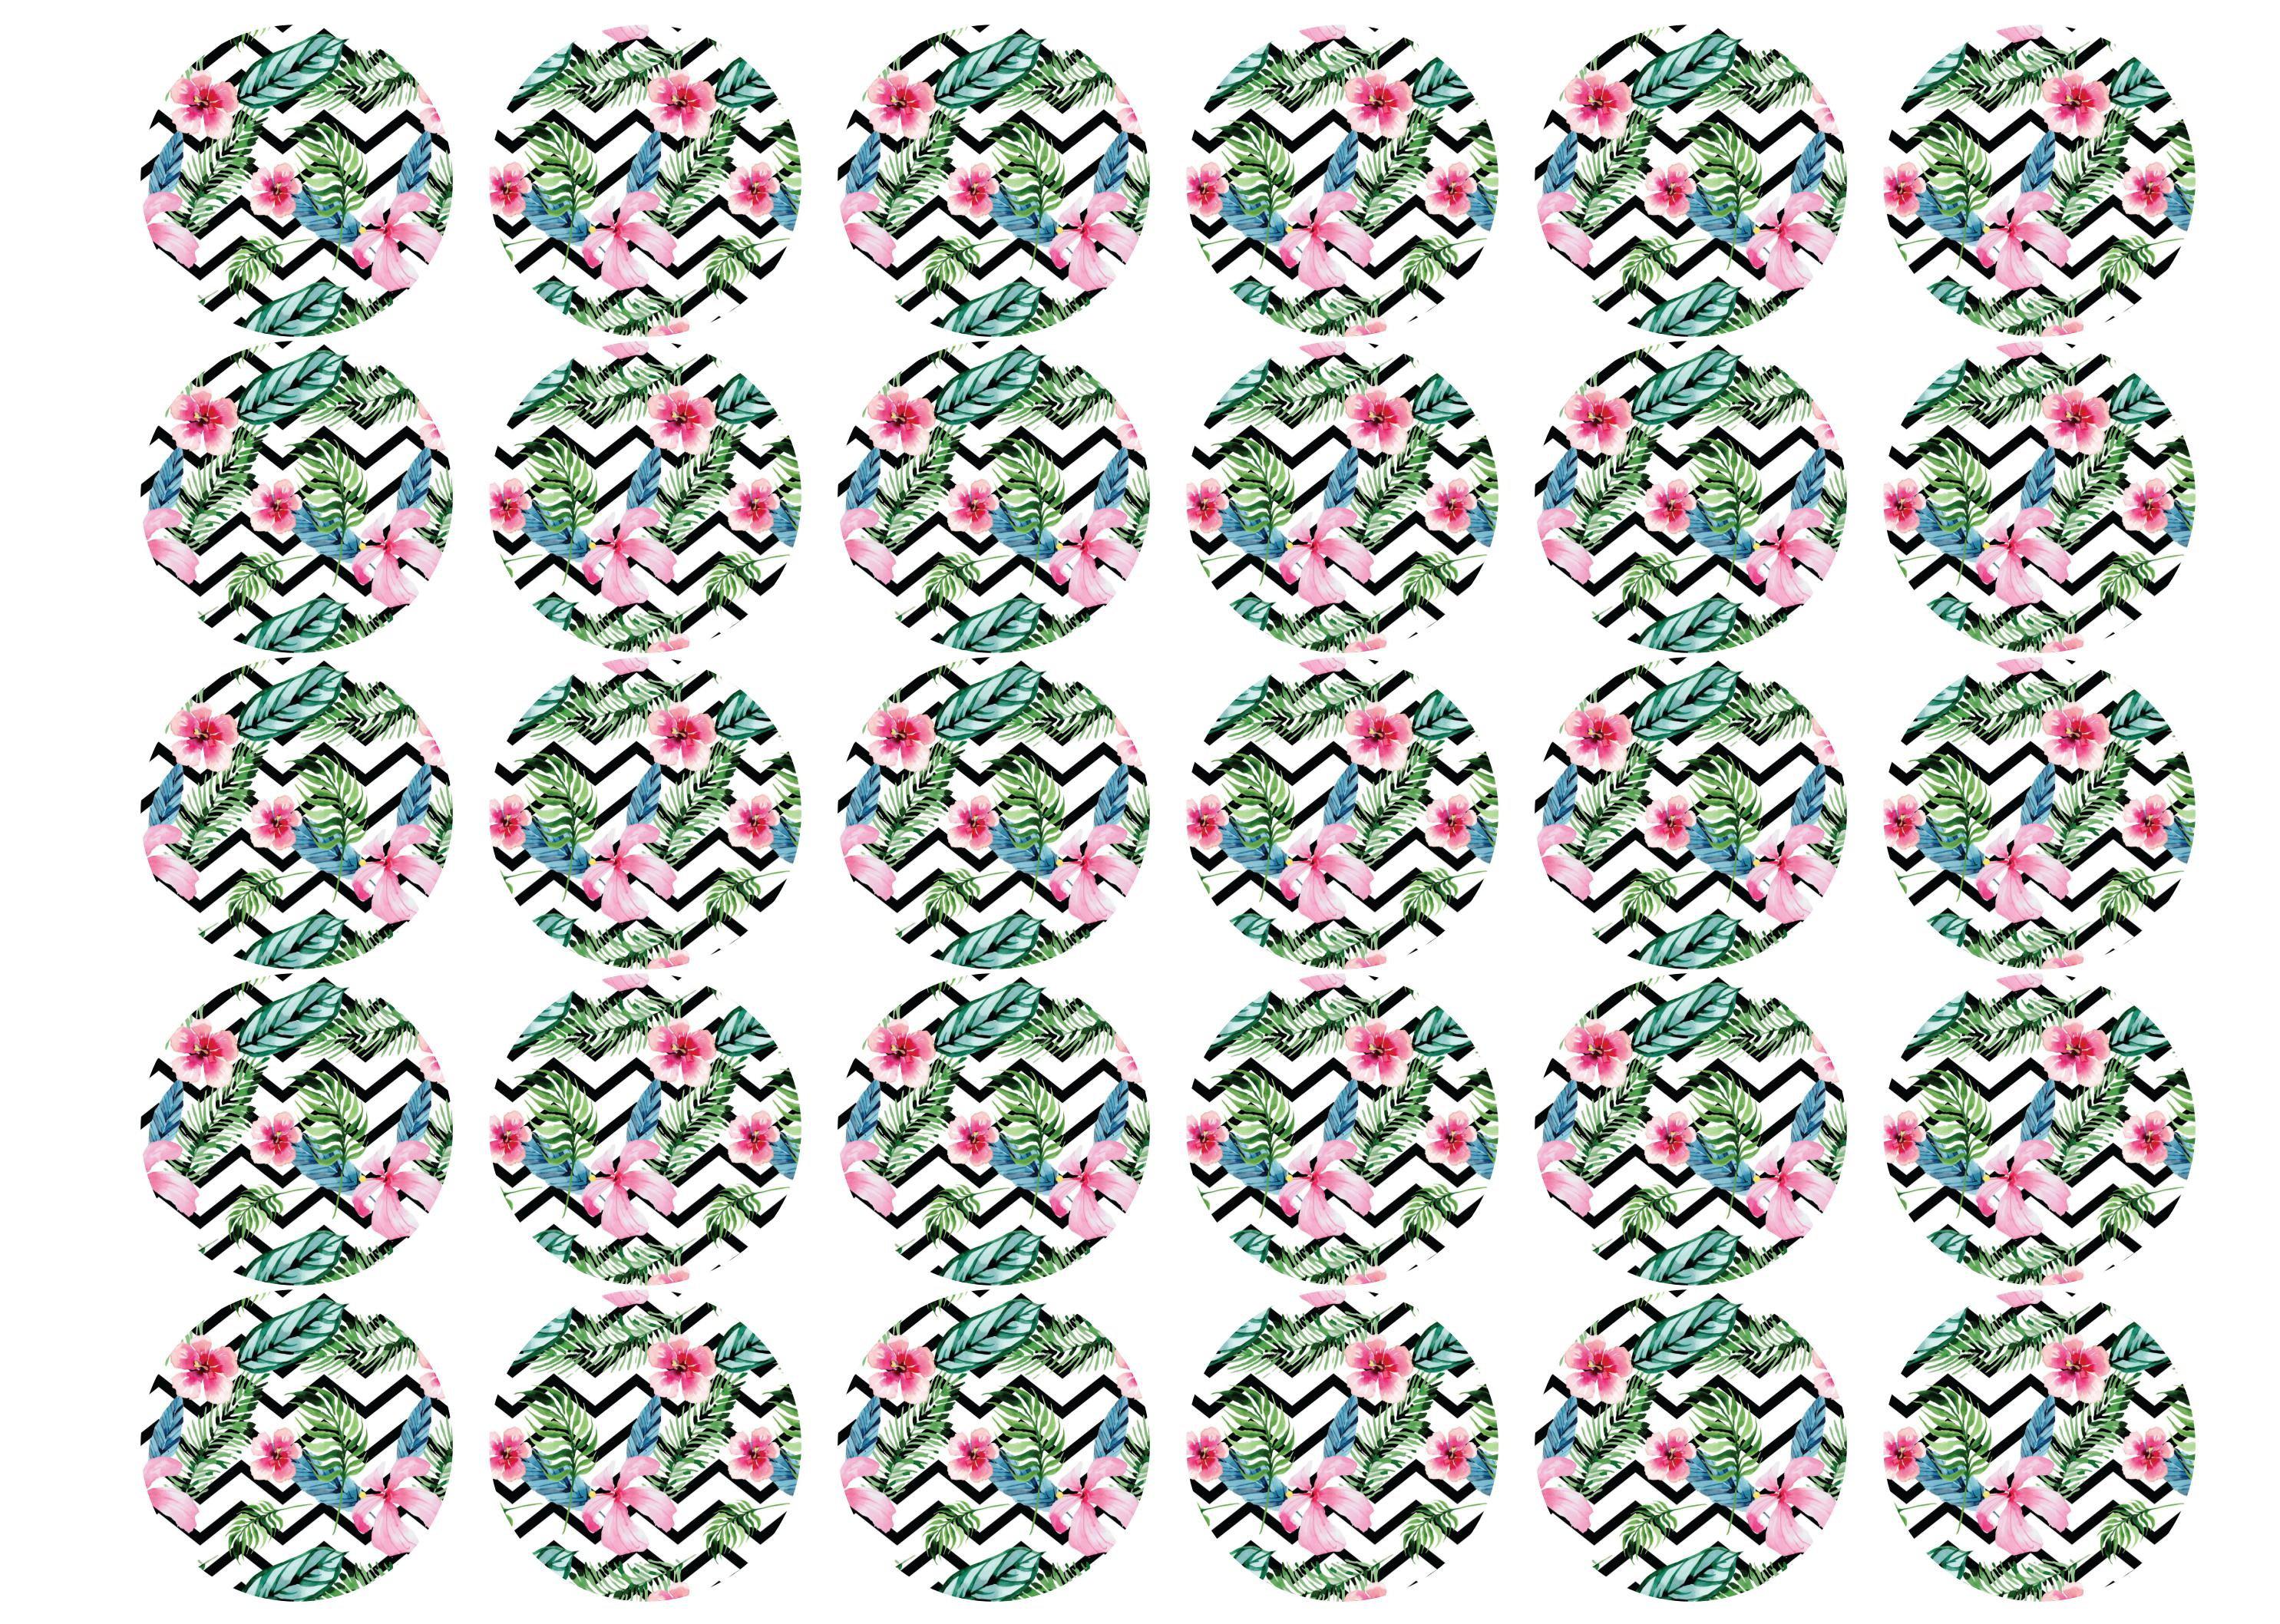 30 edible cupcake toppers with a tropical chevron pattern